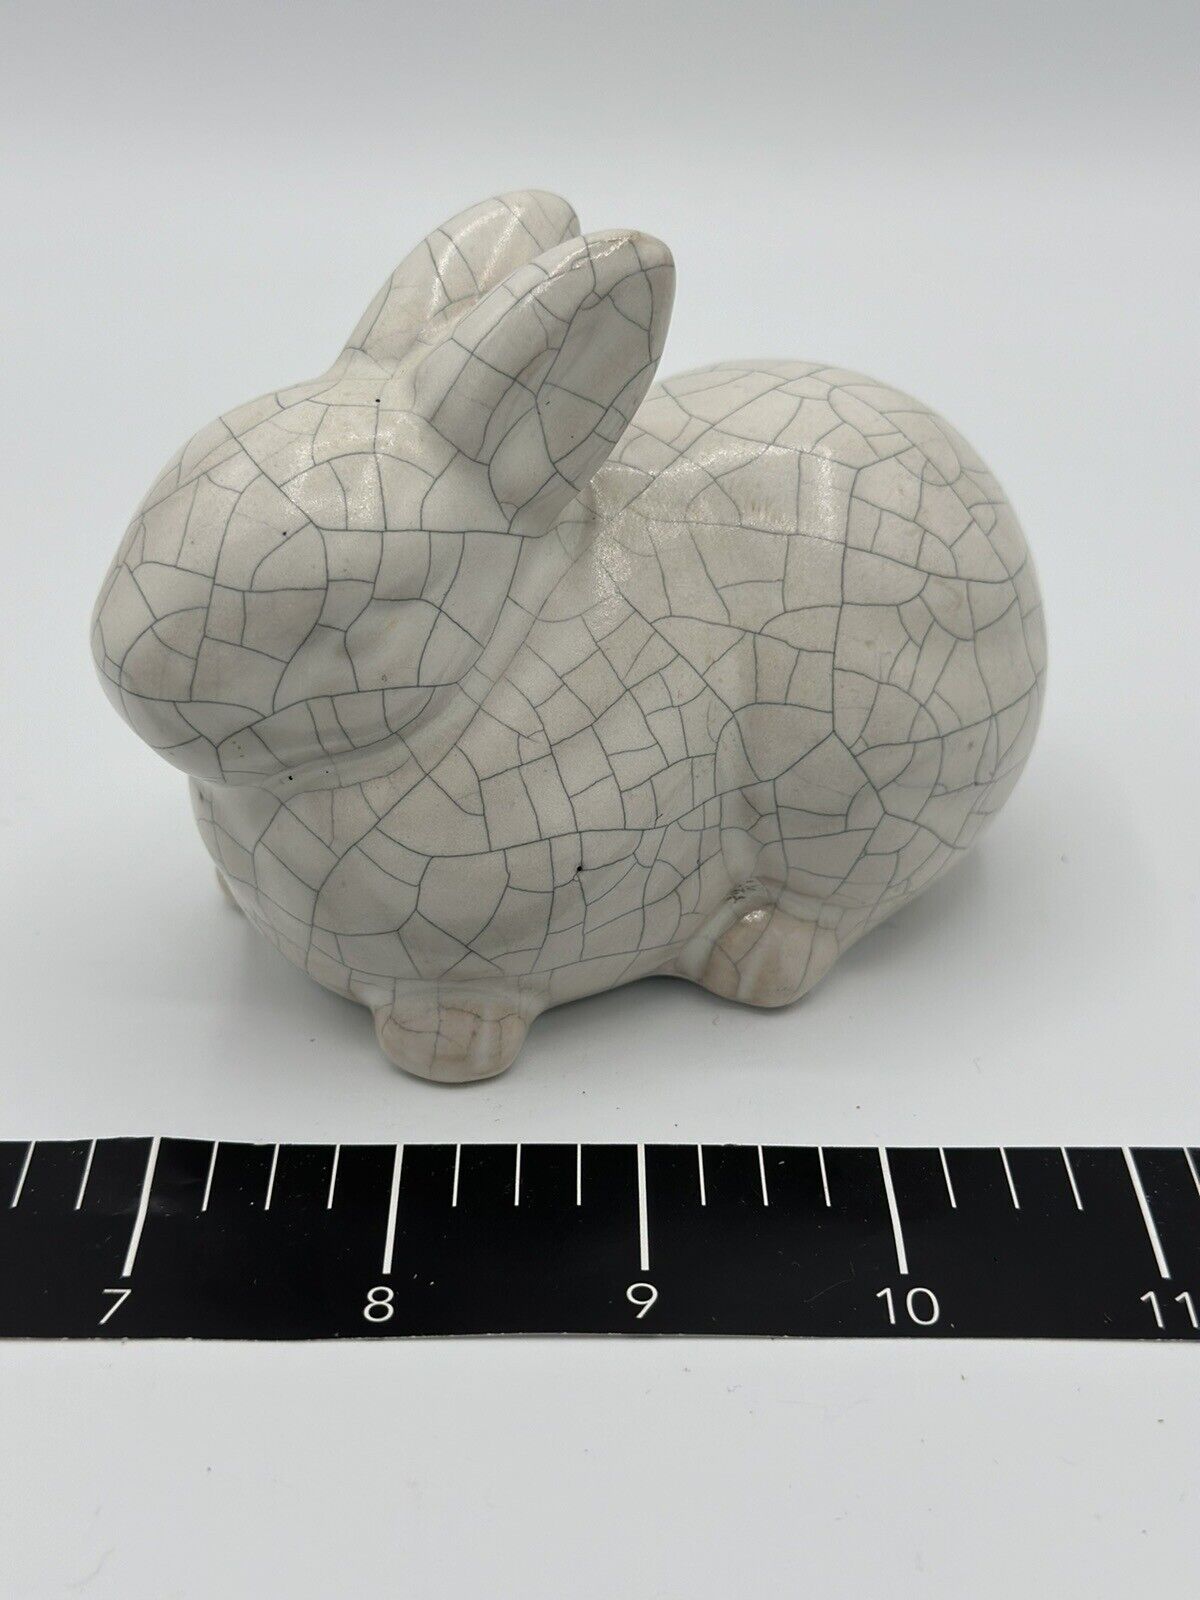 Figurine Bunny Rabbit White Crackle with Matte Finish